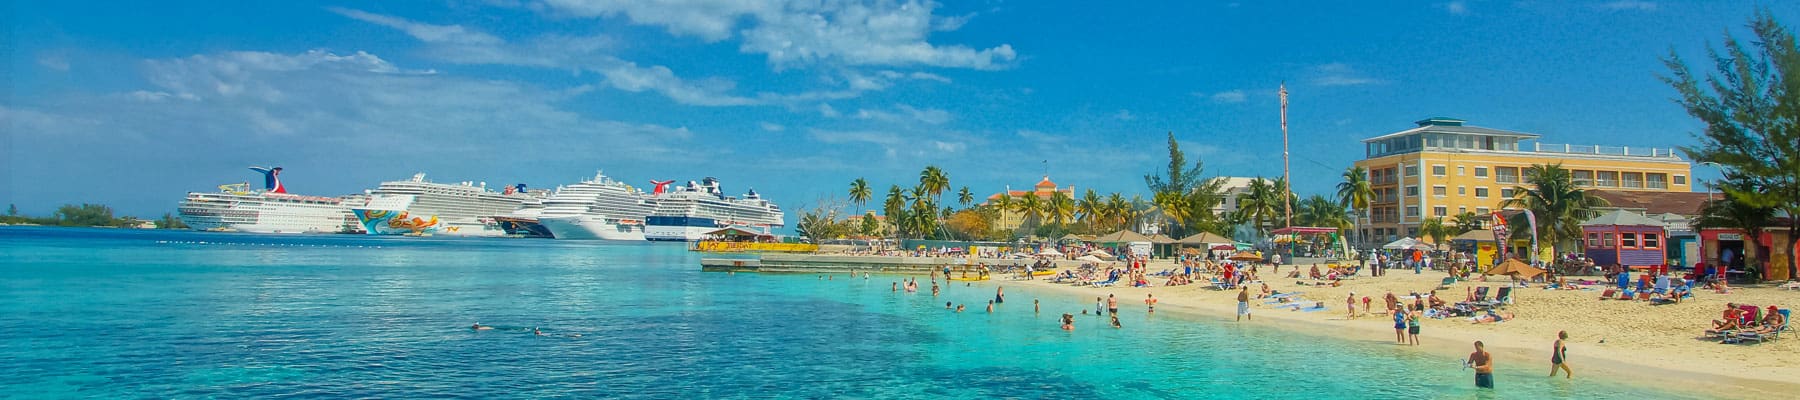 Nassau, Bahamas, all about cruises, best cruise deals, best priced cruises, cruise vacation, Eastern Caribbean Cruise Itinerary, last minute cruises